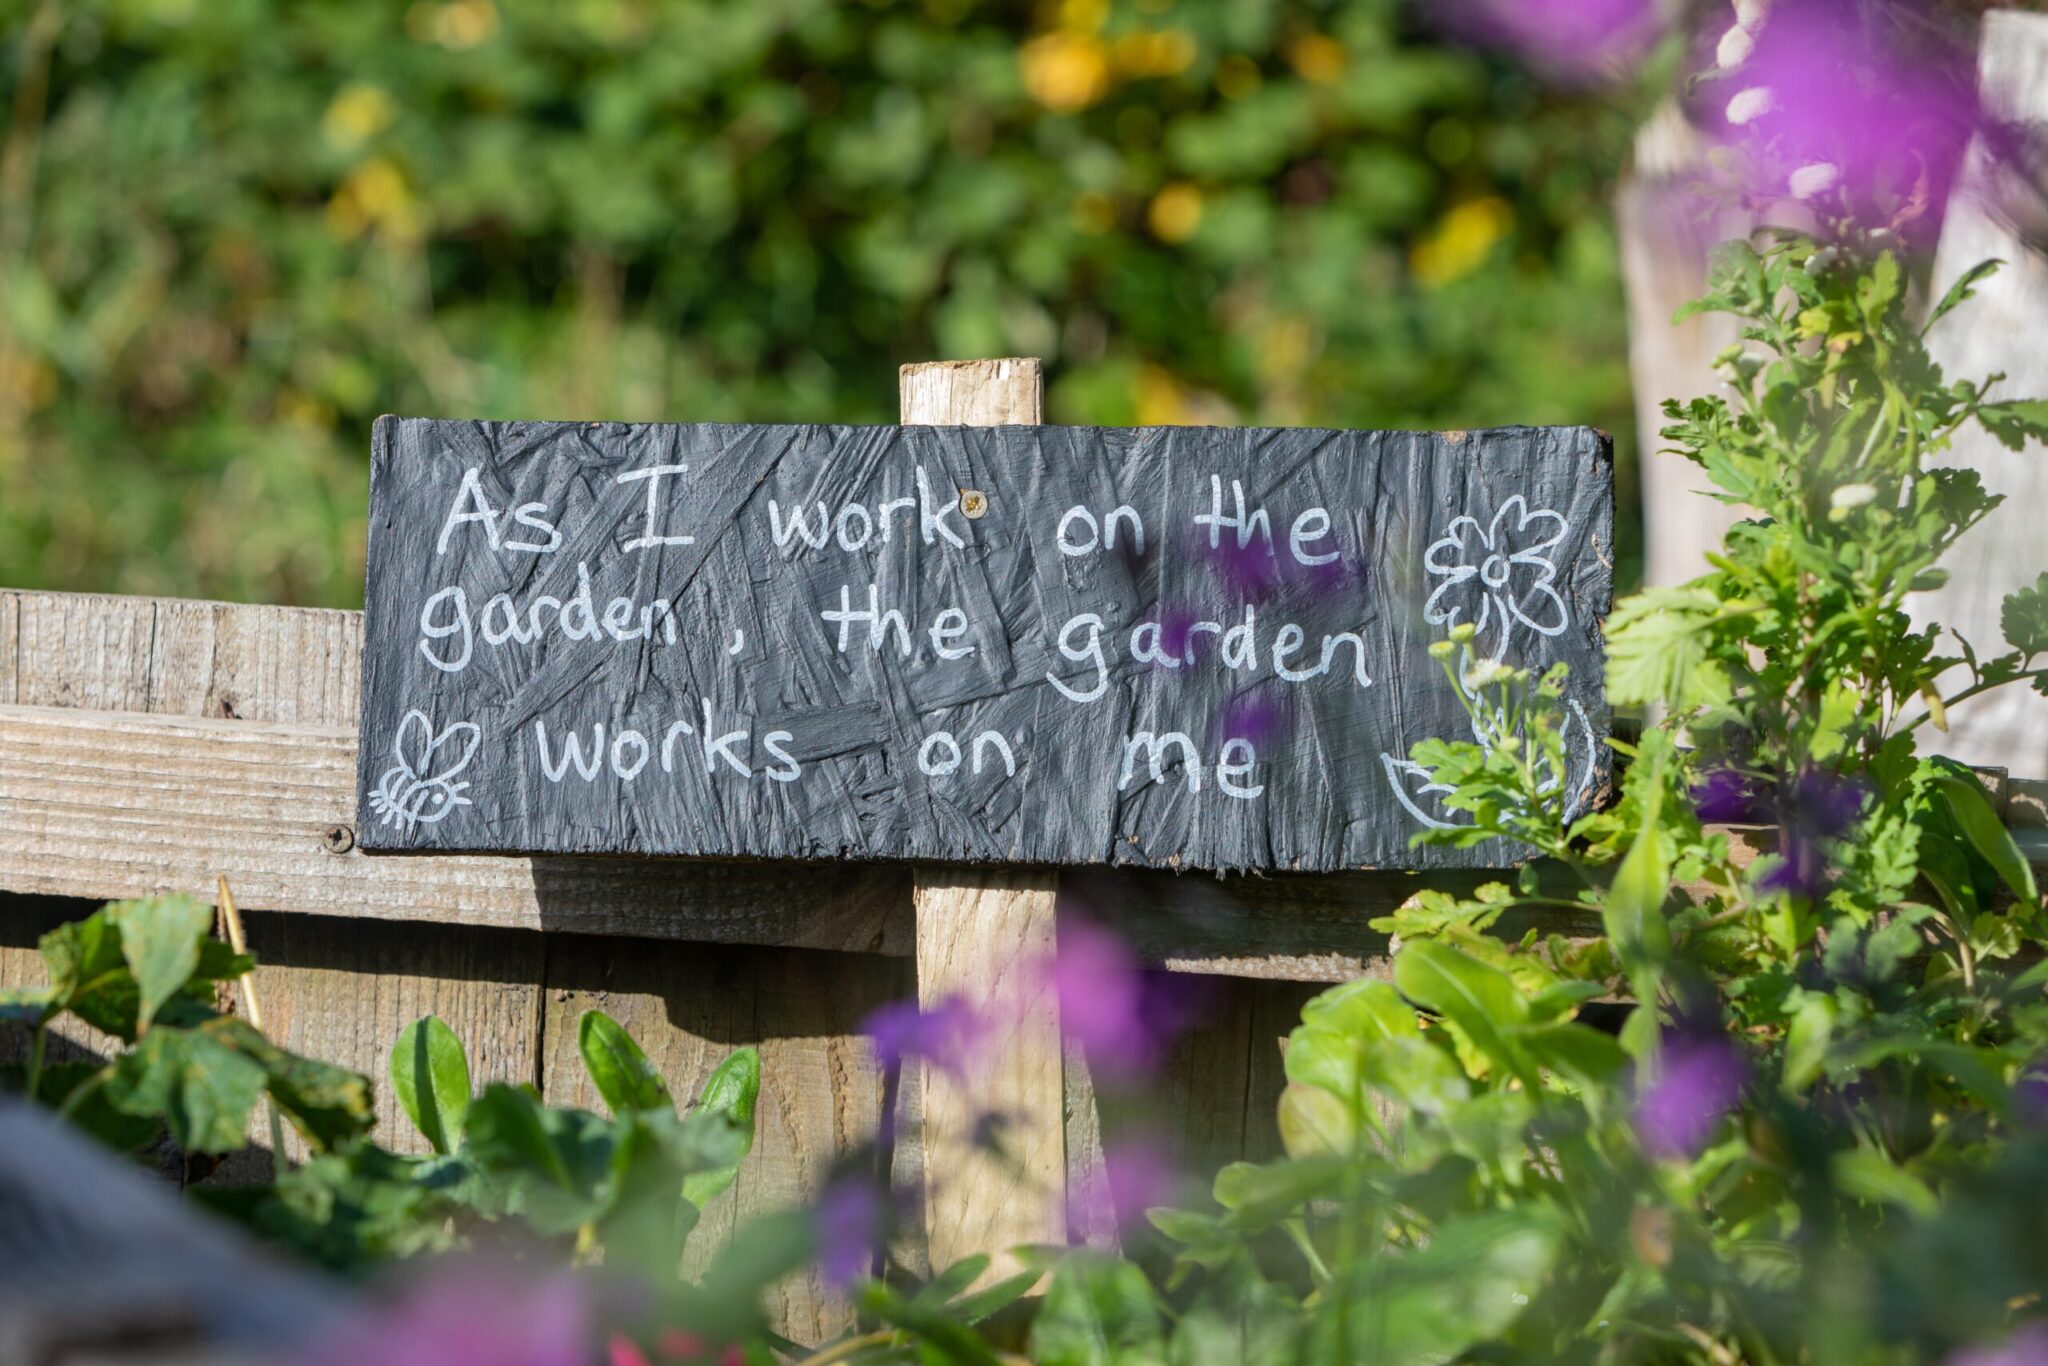 Garden sign that reads "As I work on the garden, the garden works on me"